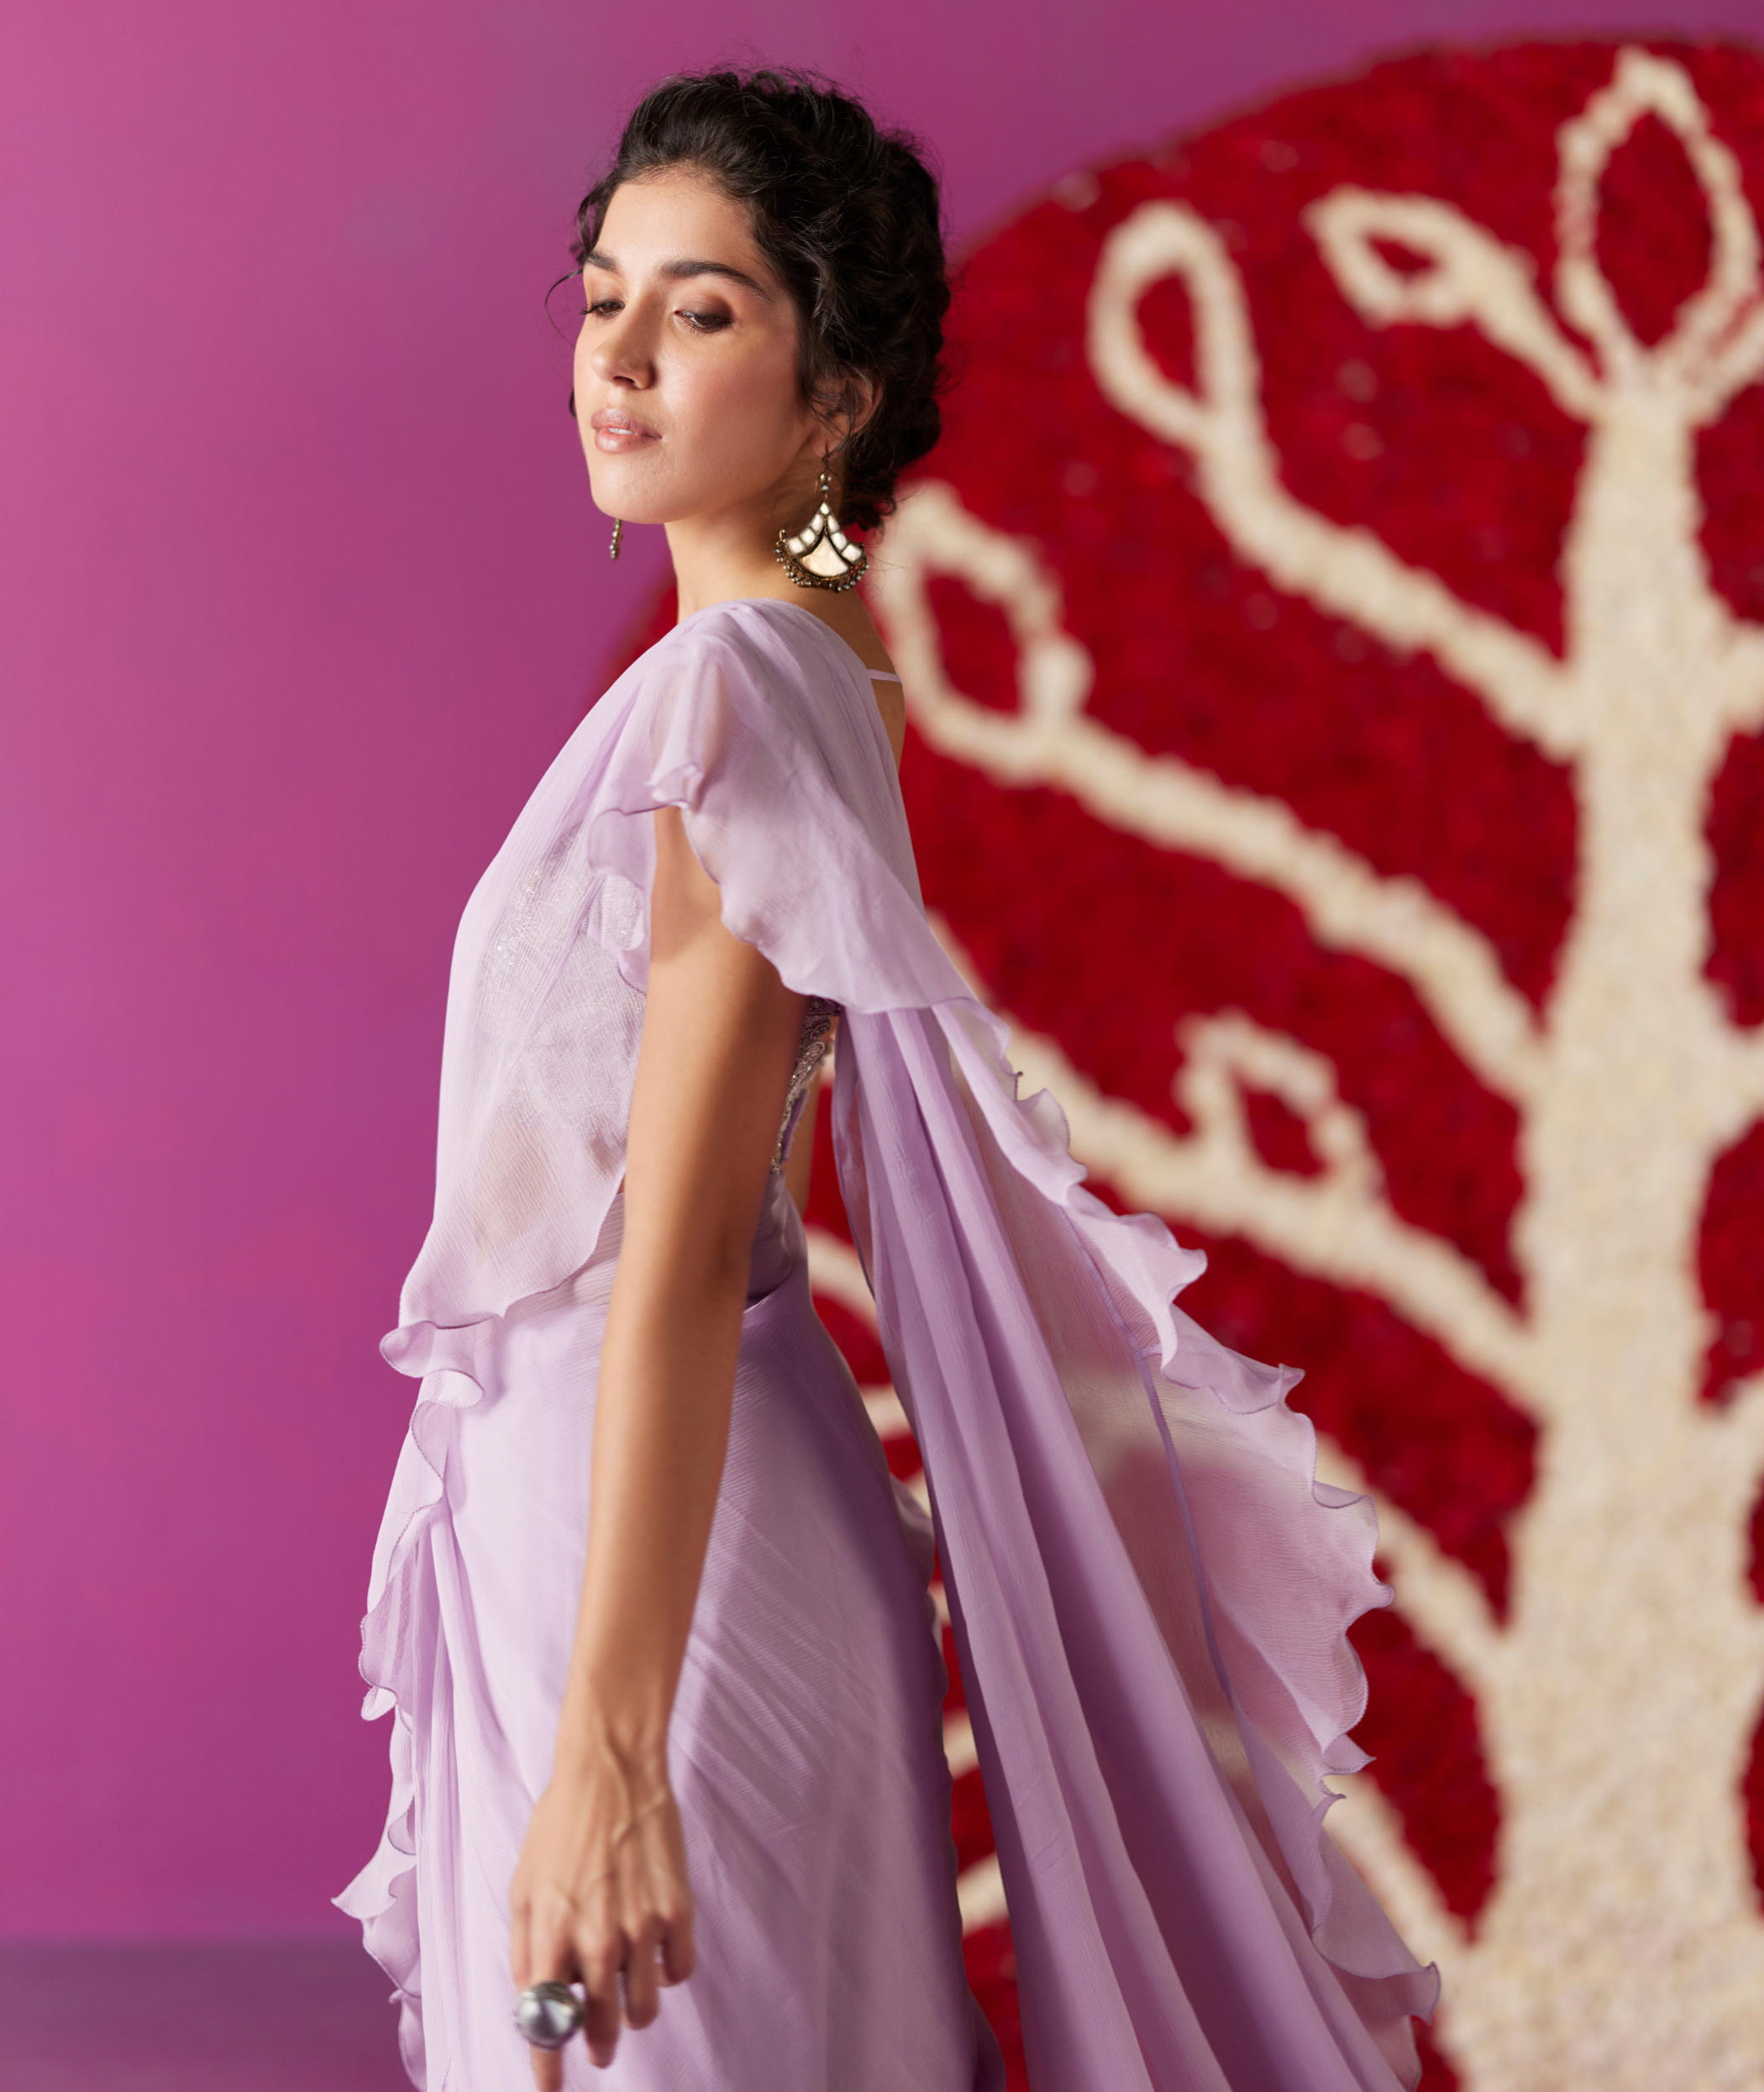 Indian Traditional & Ethnic Clothing for Women – EverBloom